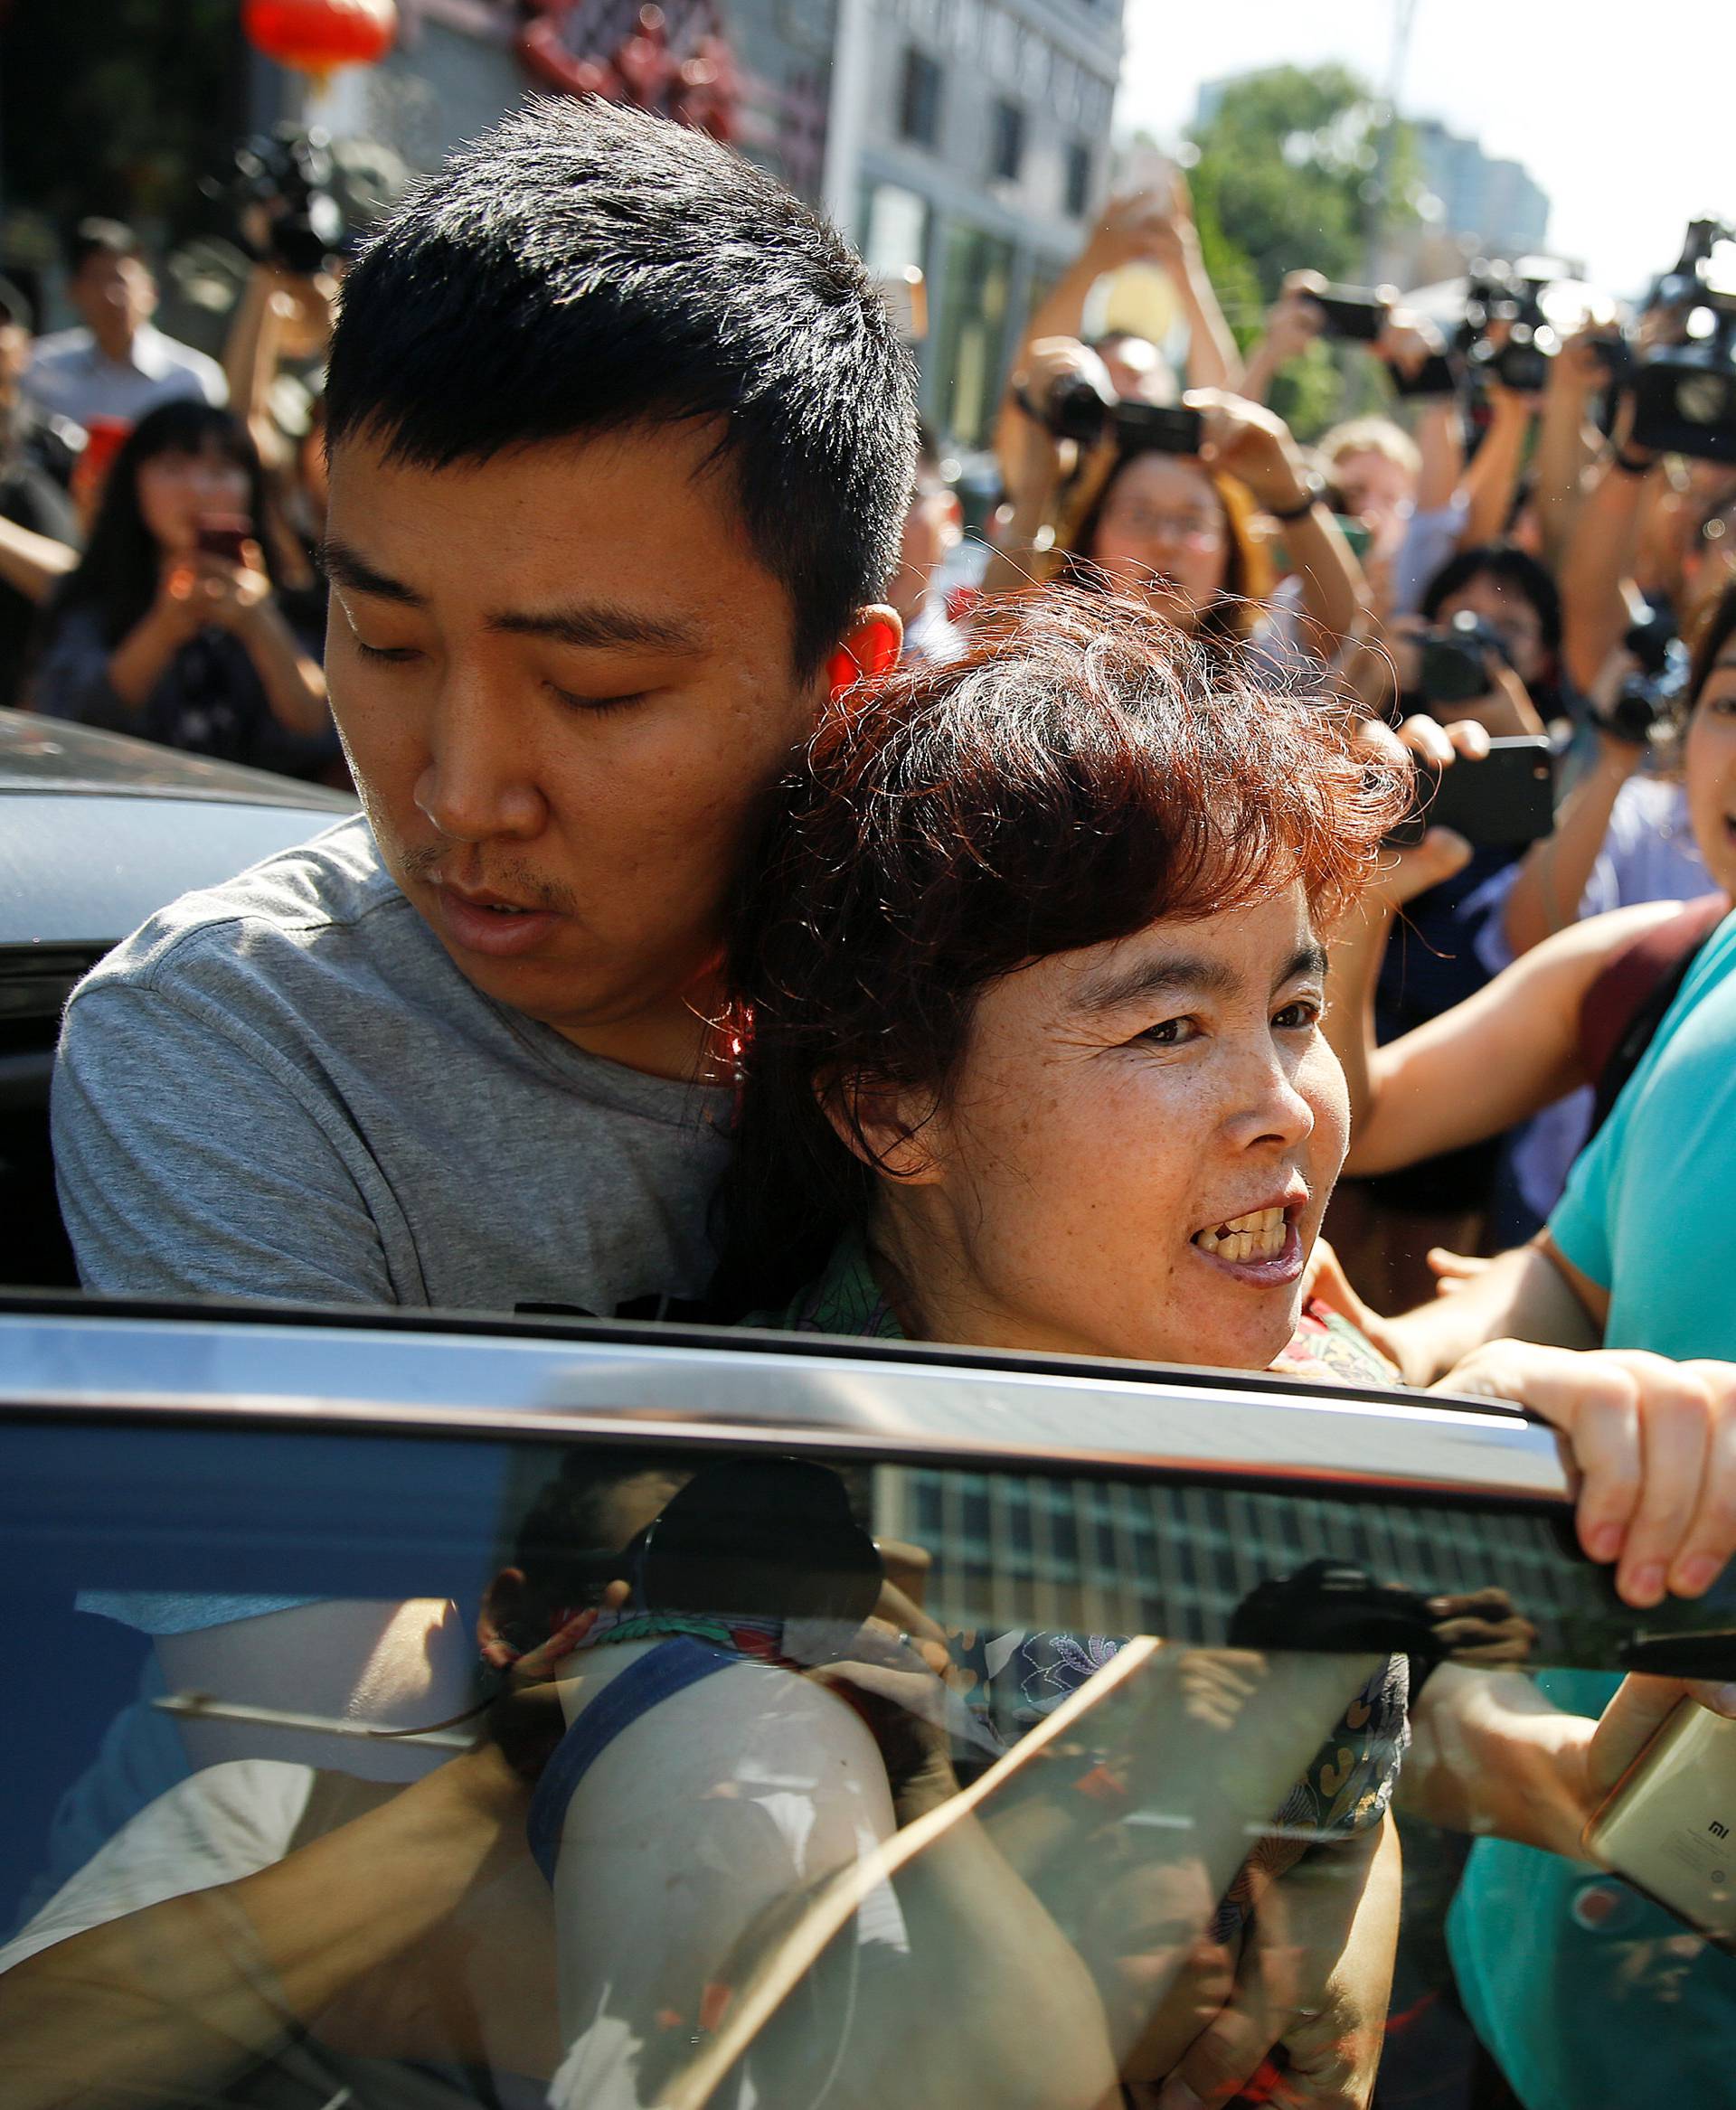 A woman is detained by security personnel outside the U.S. embassy in Beijing